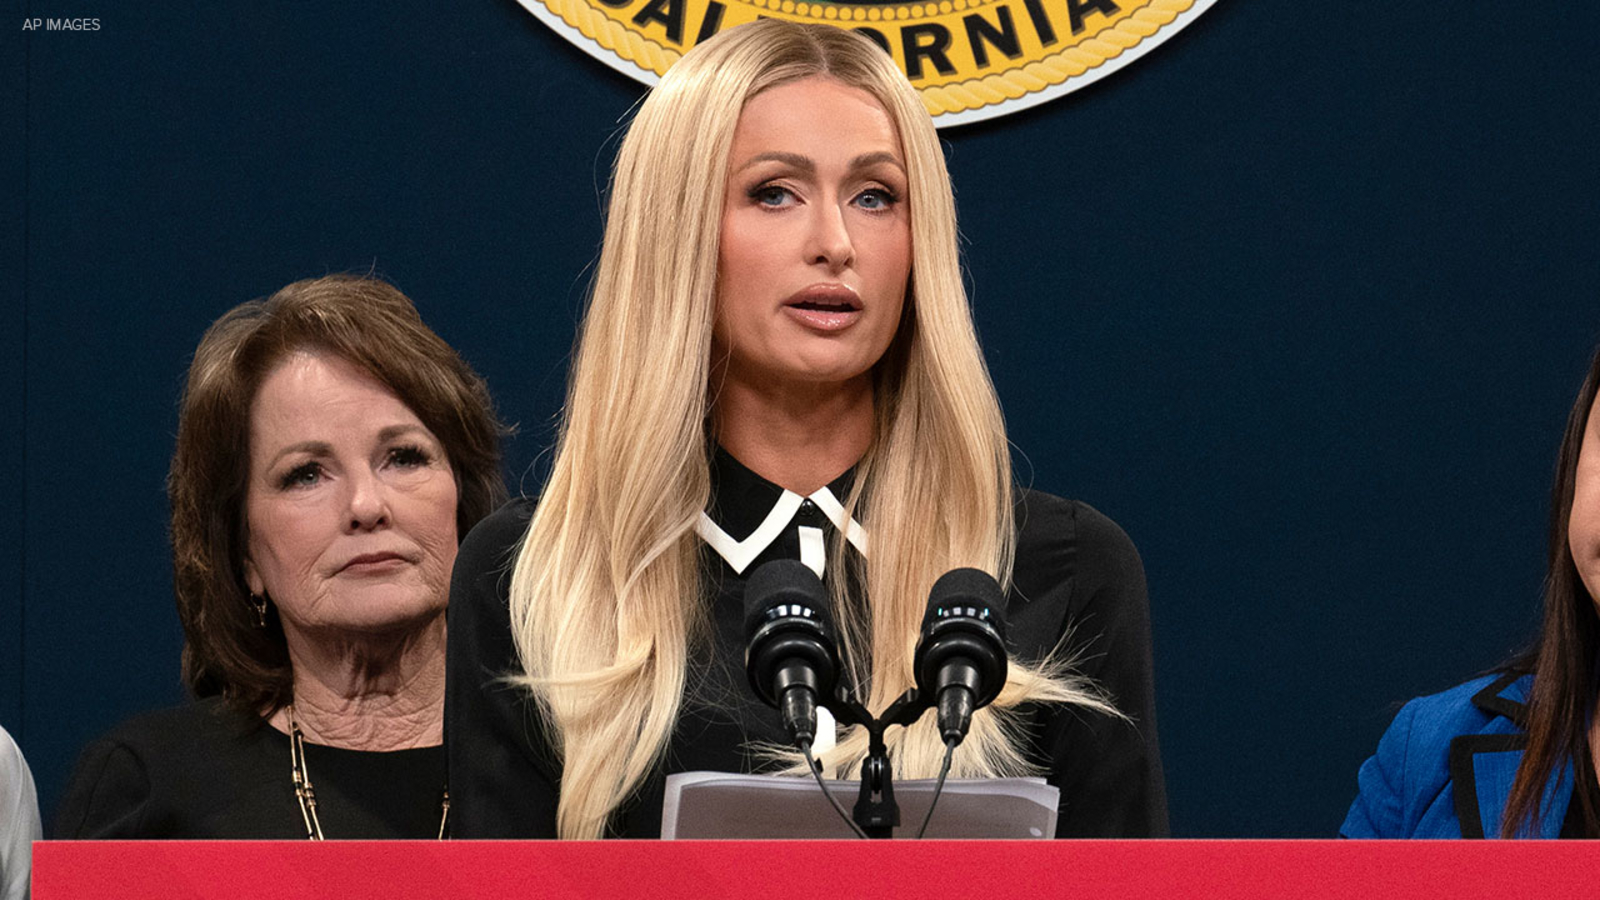 Paris Hilton backs California bill to bring more transparency to youth treatment facilities [Video]